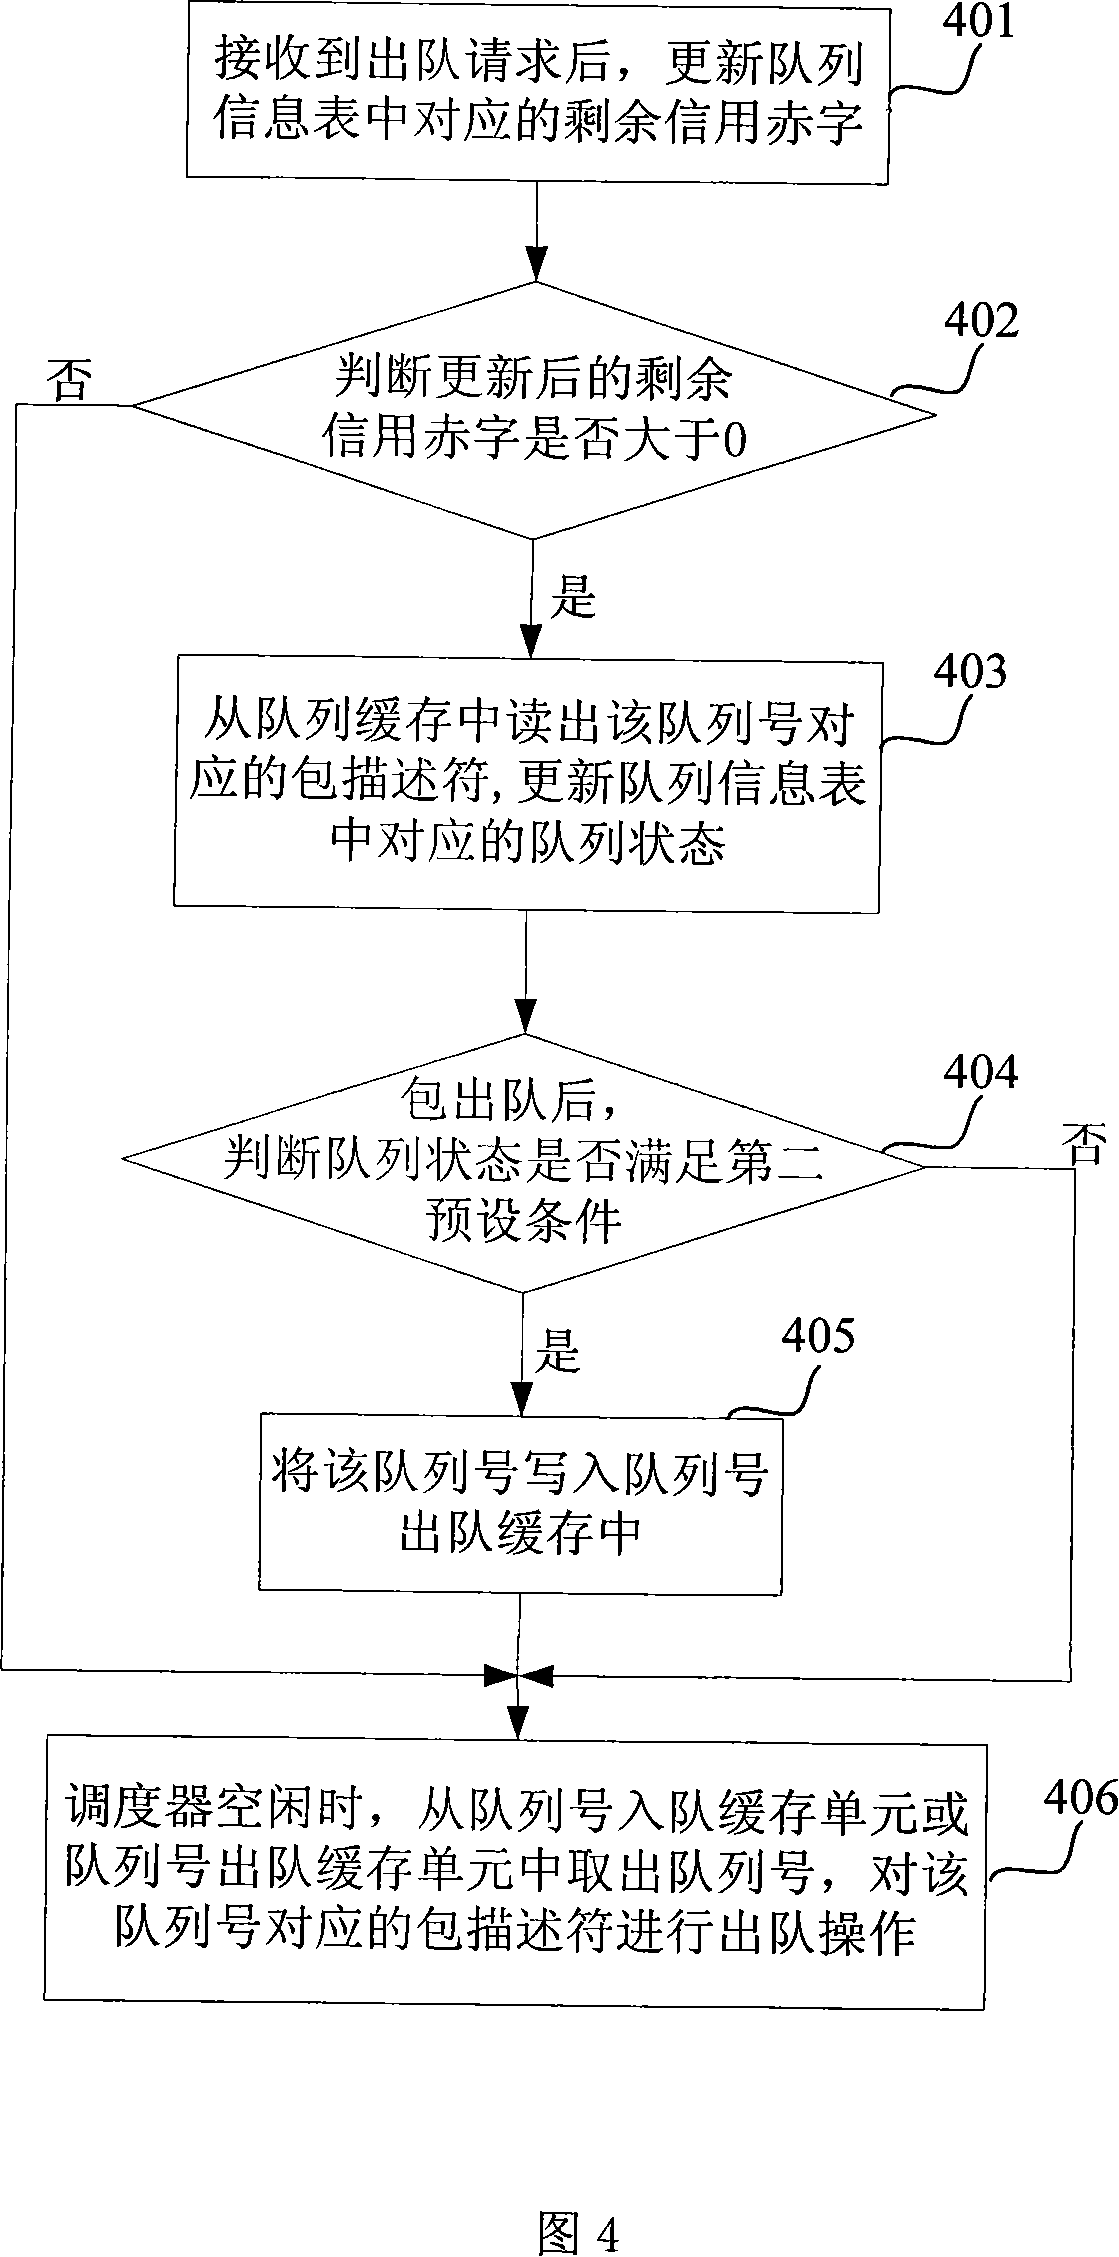 Dispatch device and method of enqueuing and dequeuing message